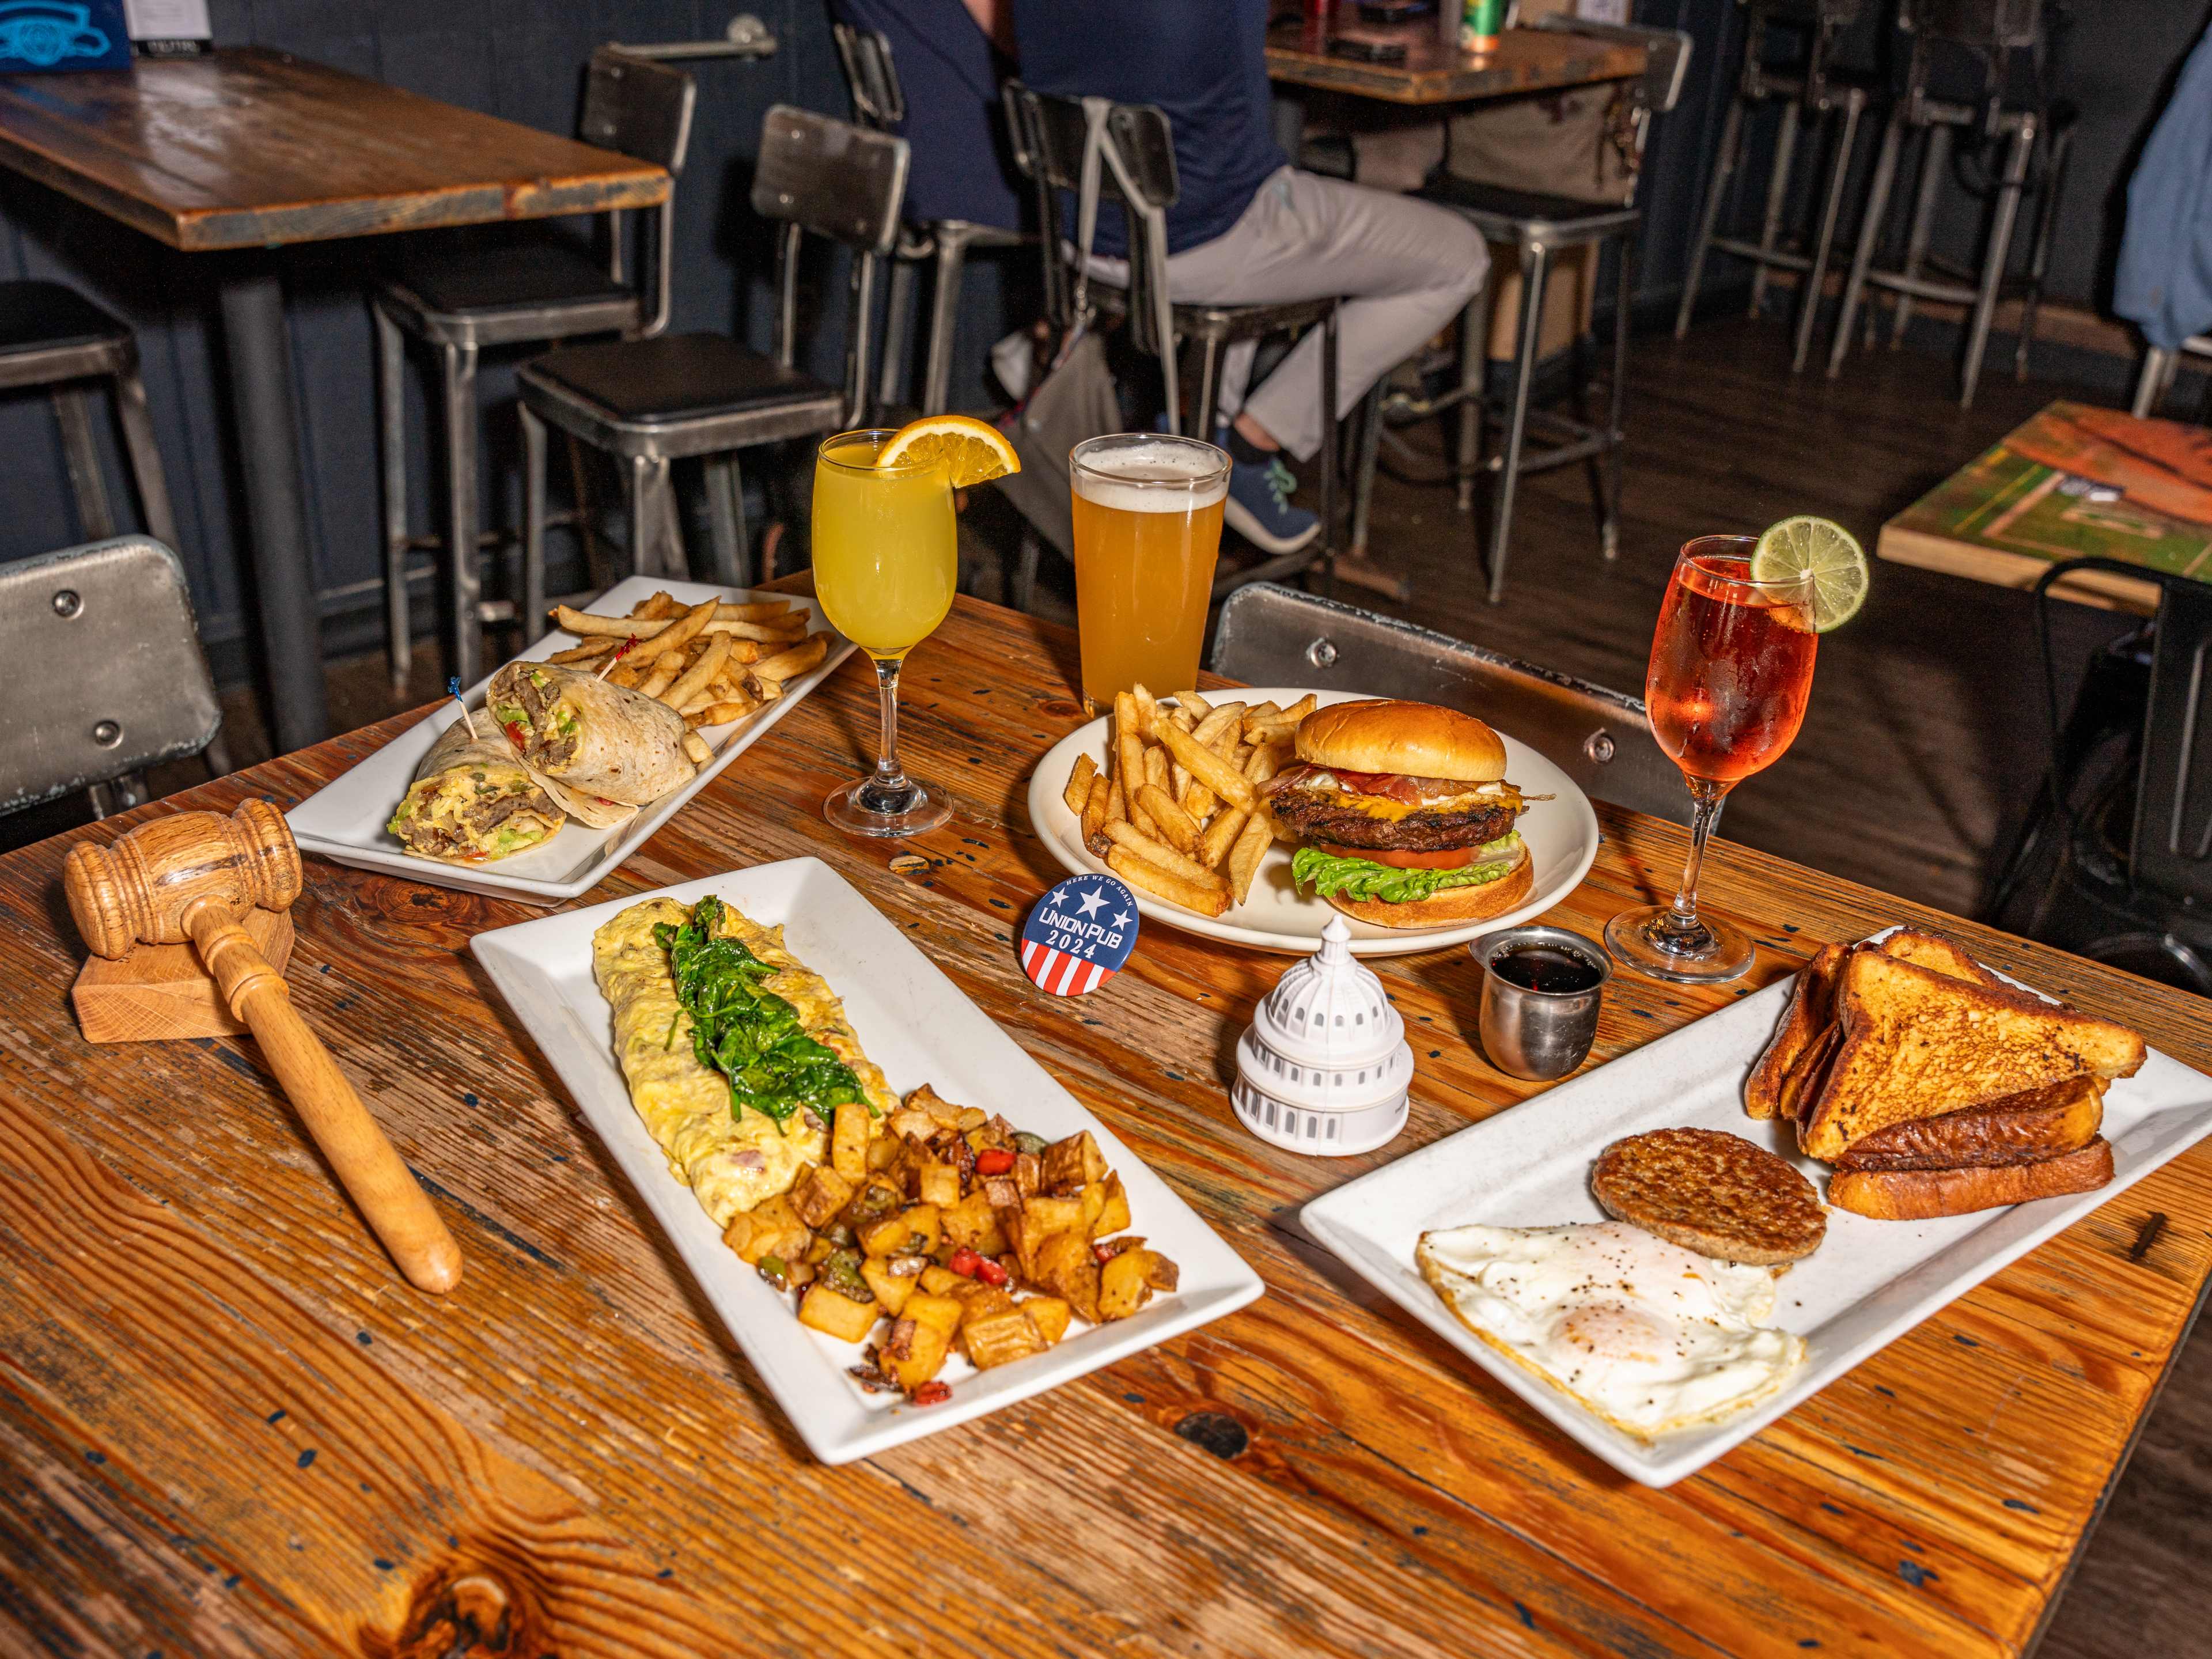 spread of brunch dishes and drinks